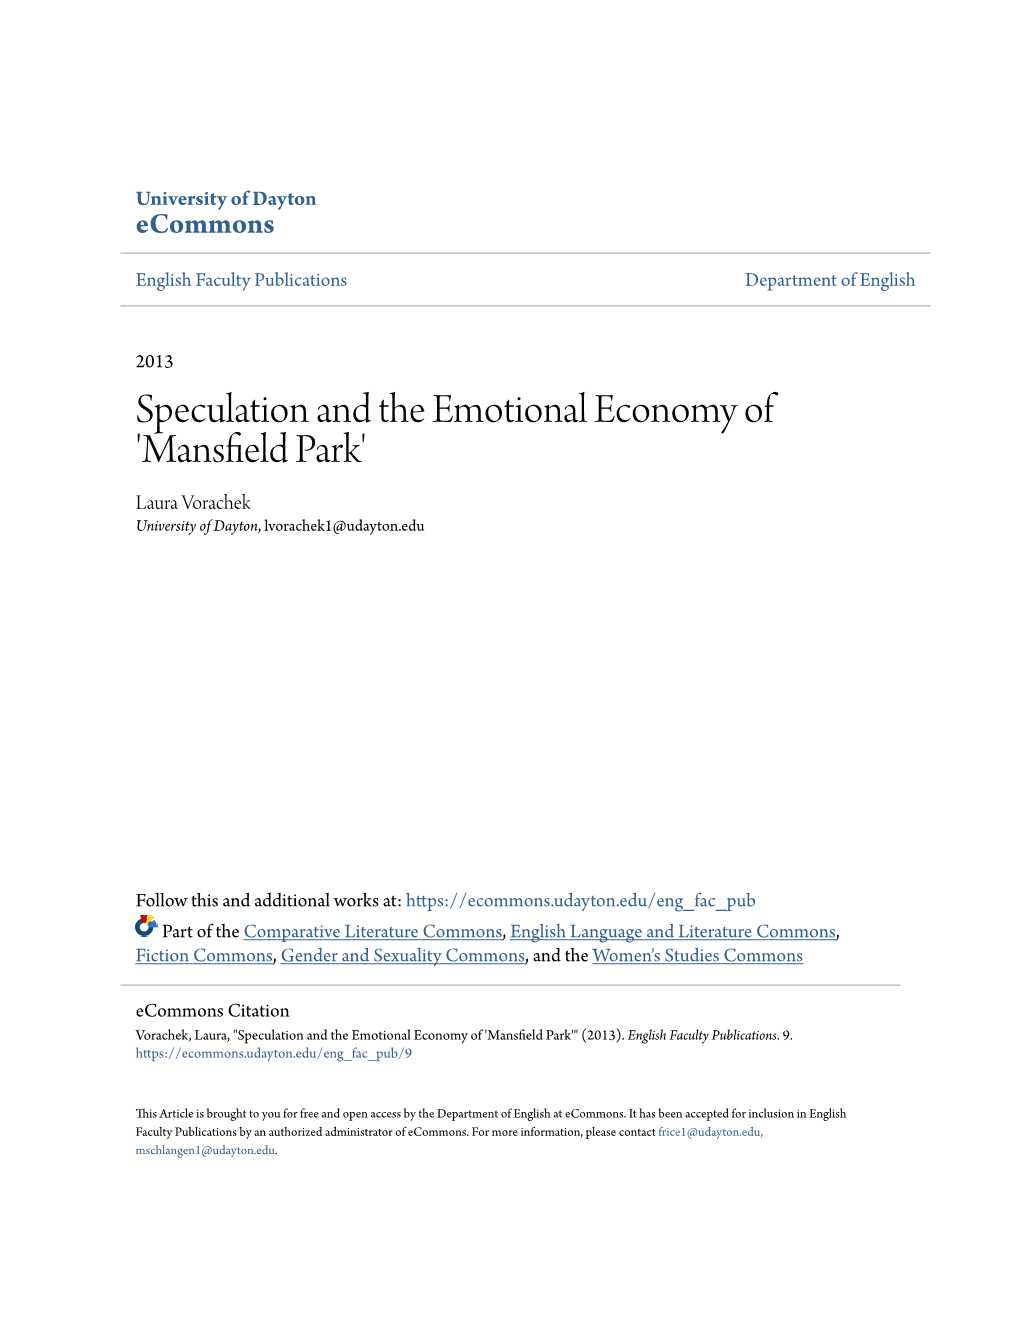 Speculation and the Emotional Economy of 'Mansfield Park'" (2013)